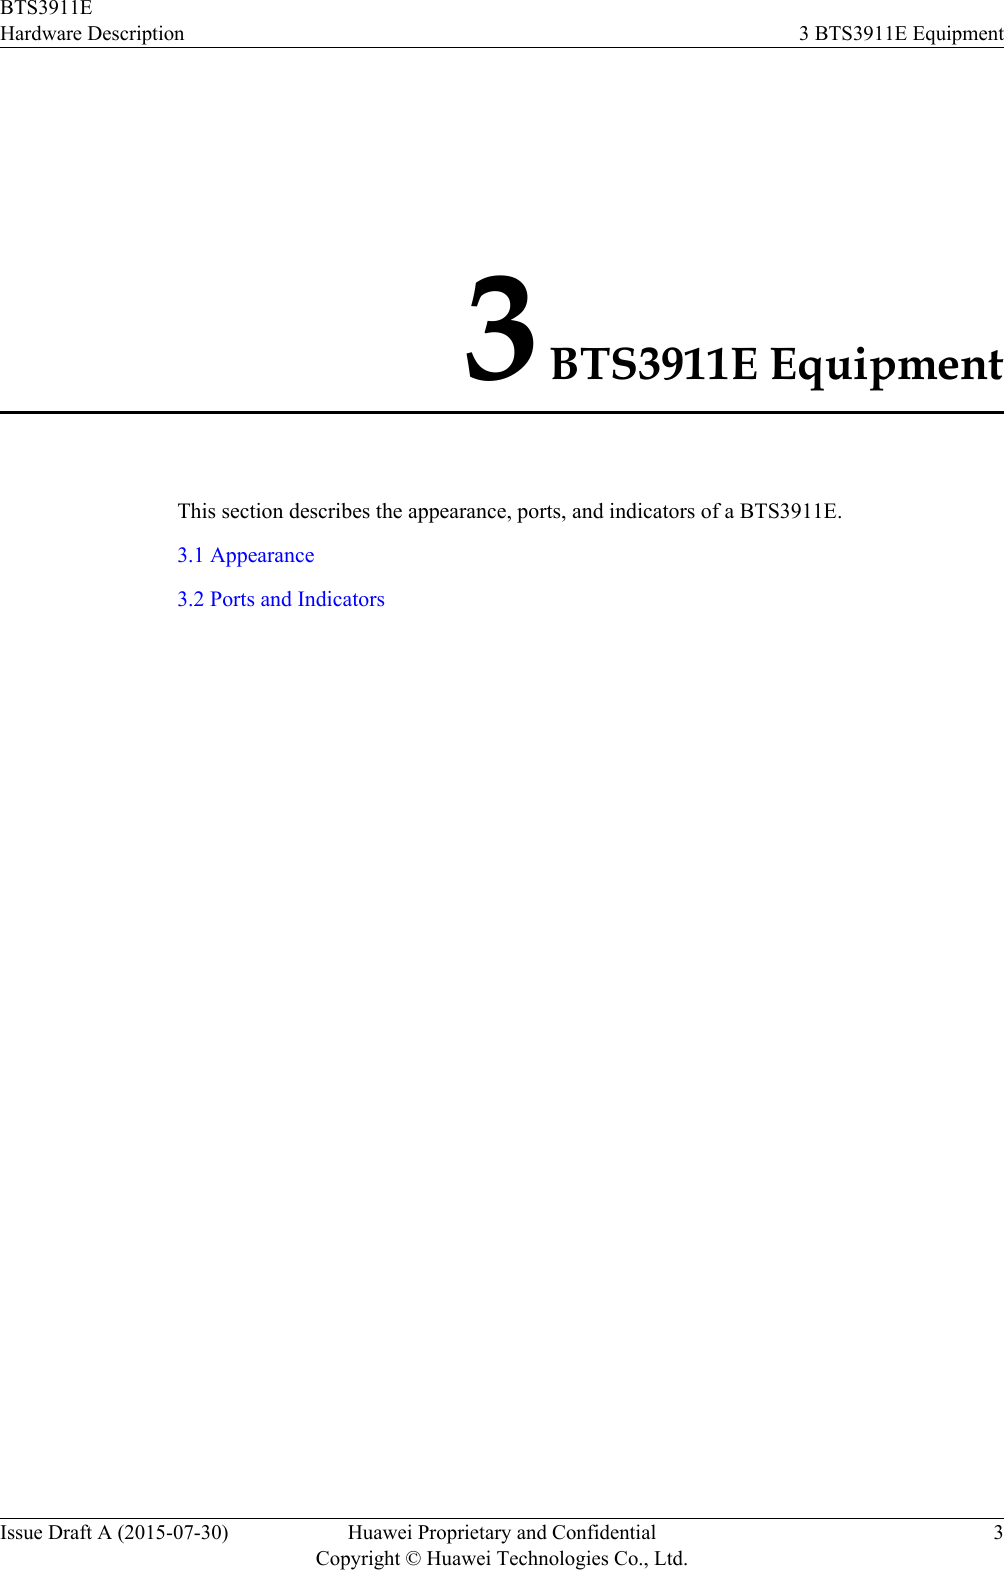 3 BTS3911E EquipmentThis section describes the appearance, ports, and indicators of a BTS3911E.3.1 Appearance3.2 Ports and IndicatorsBTS3911EHardware Description 3 BTS3911E EquipmentIssue Draft A (2015-07-30) Huawei Proprietary and ConfidentialCopyright © Huawei Technologies Co., Ltd.3